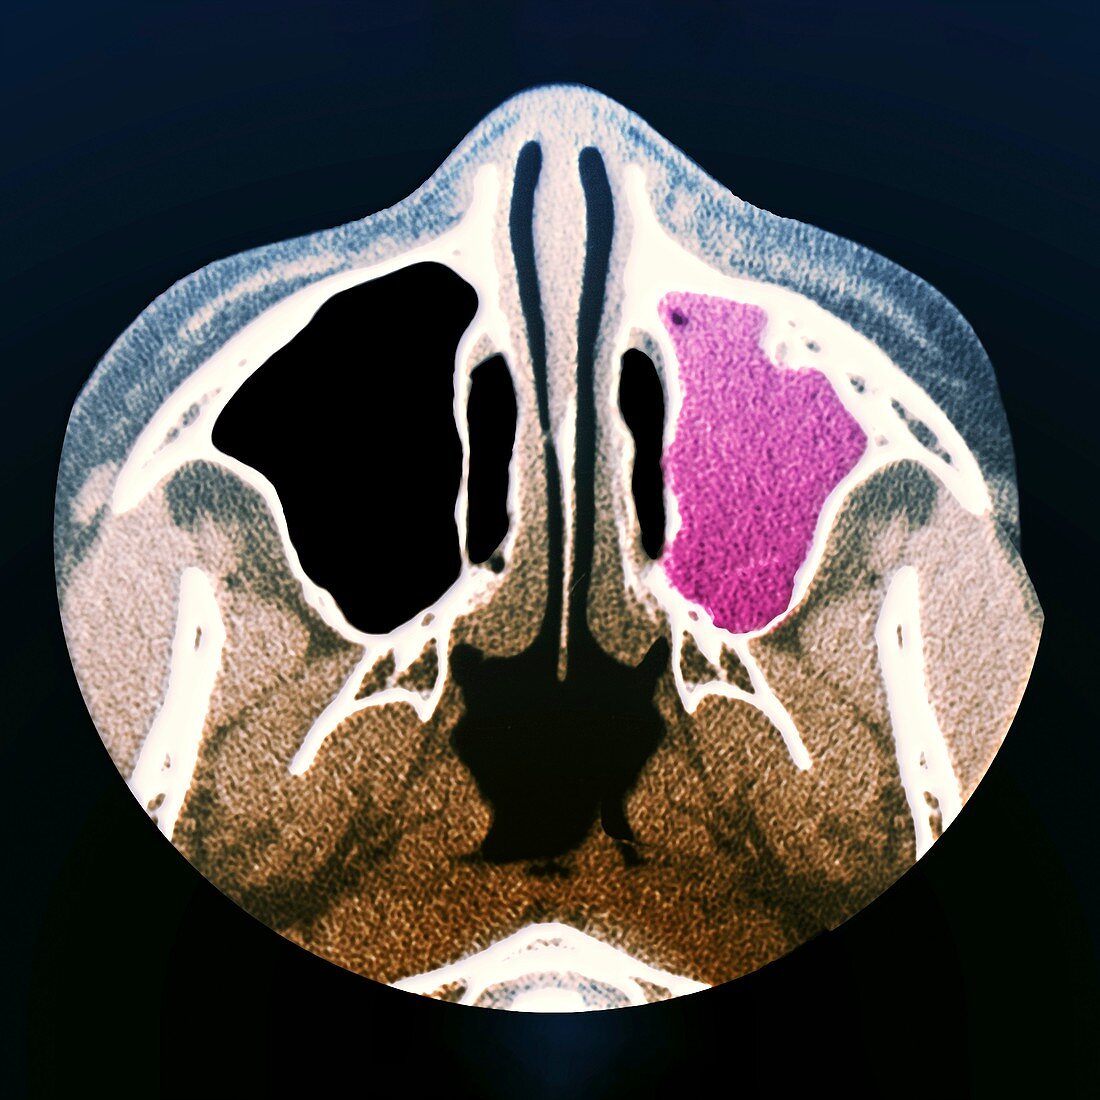 Sinus infection,CT scan